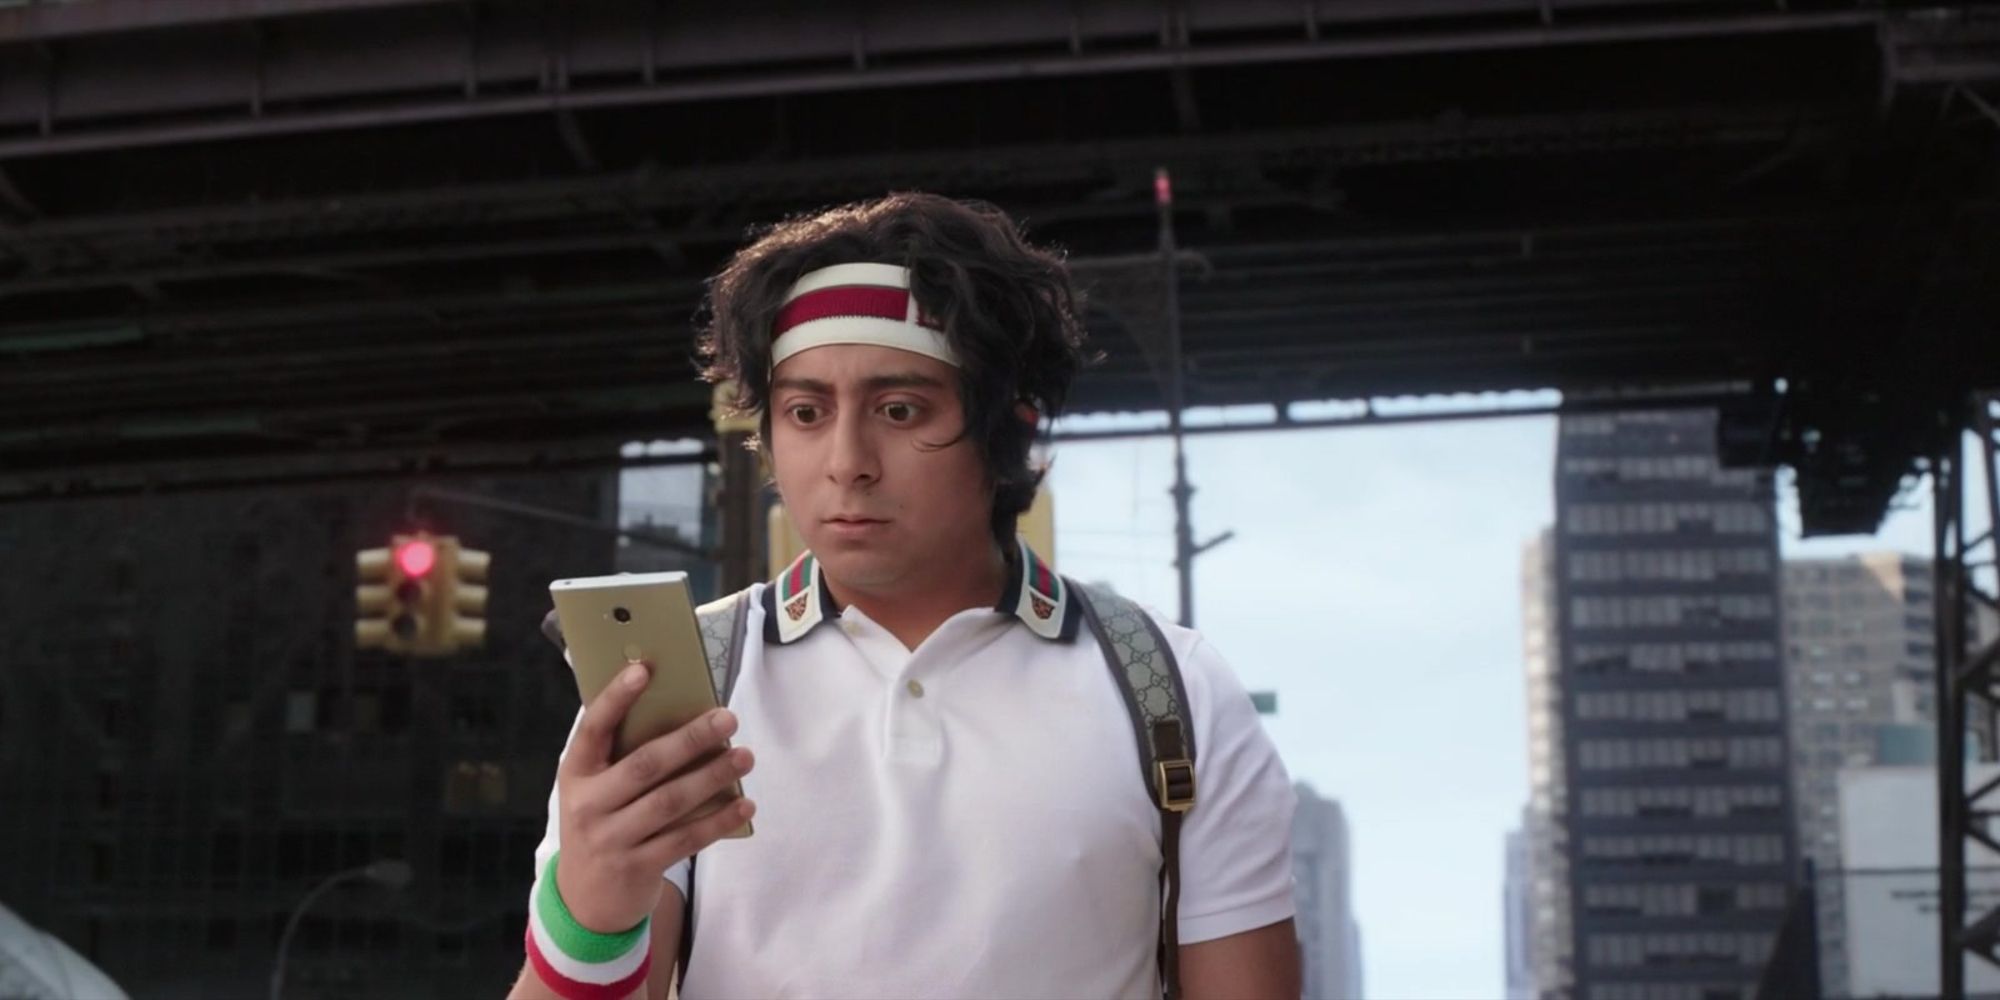 Flash Thompson uses his phone in Spider-Man: No Way Home.